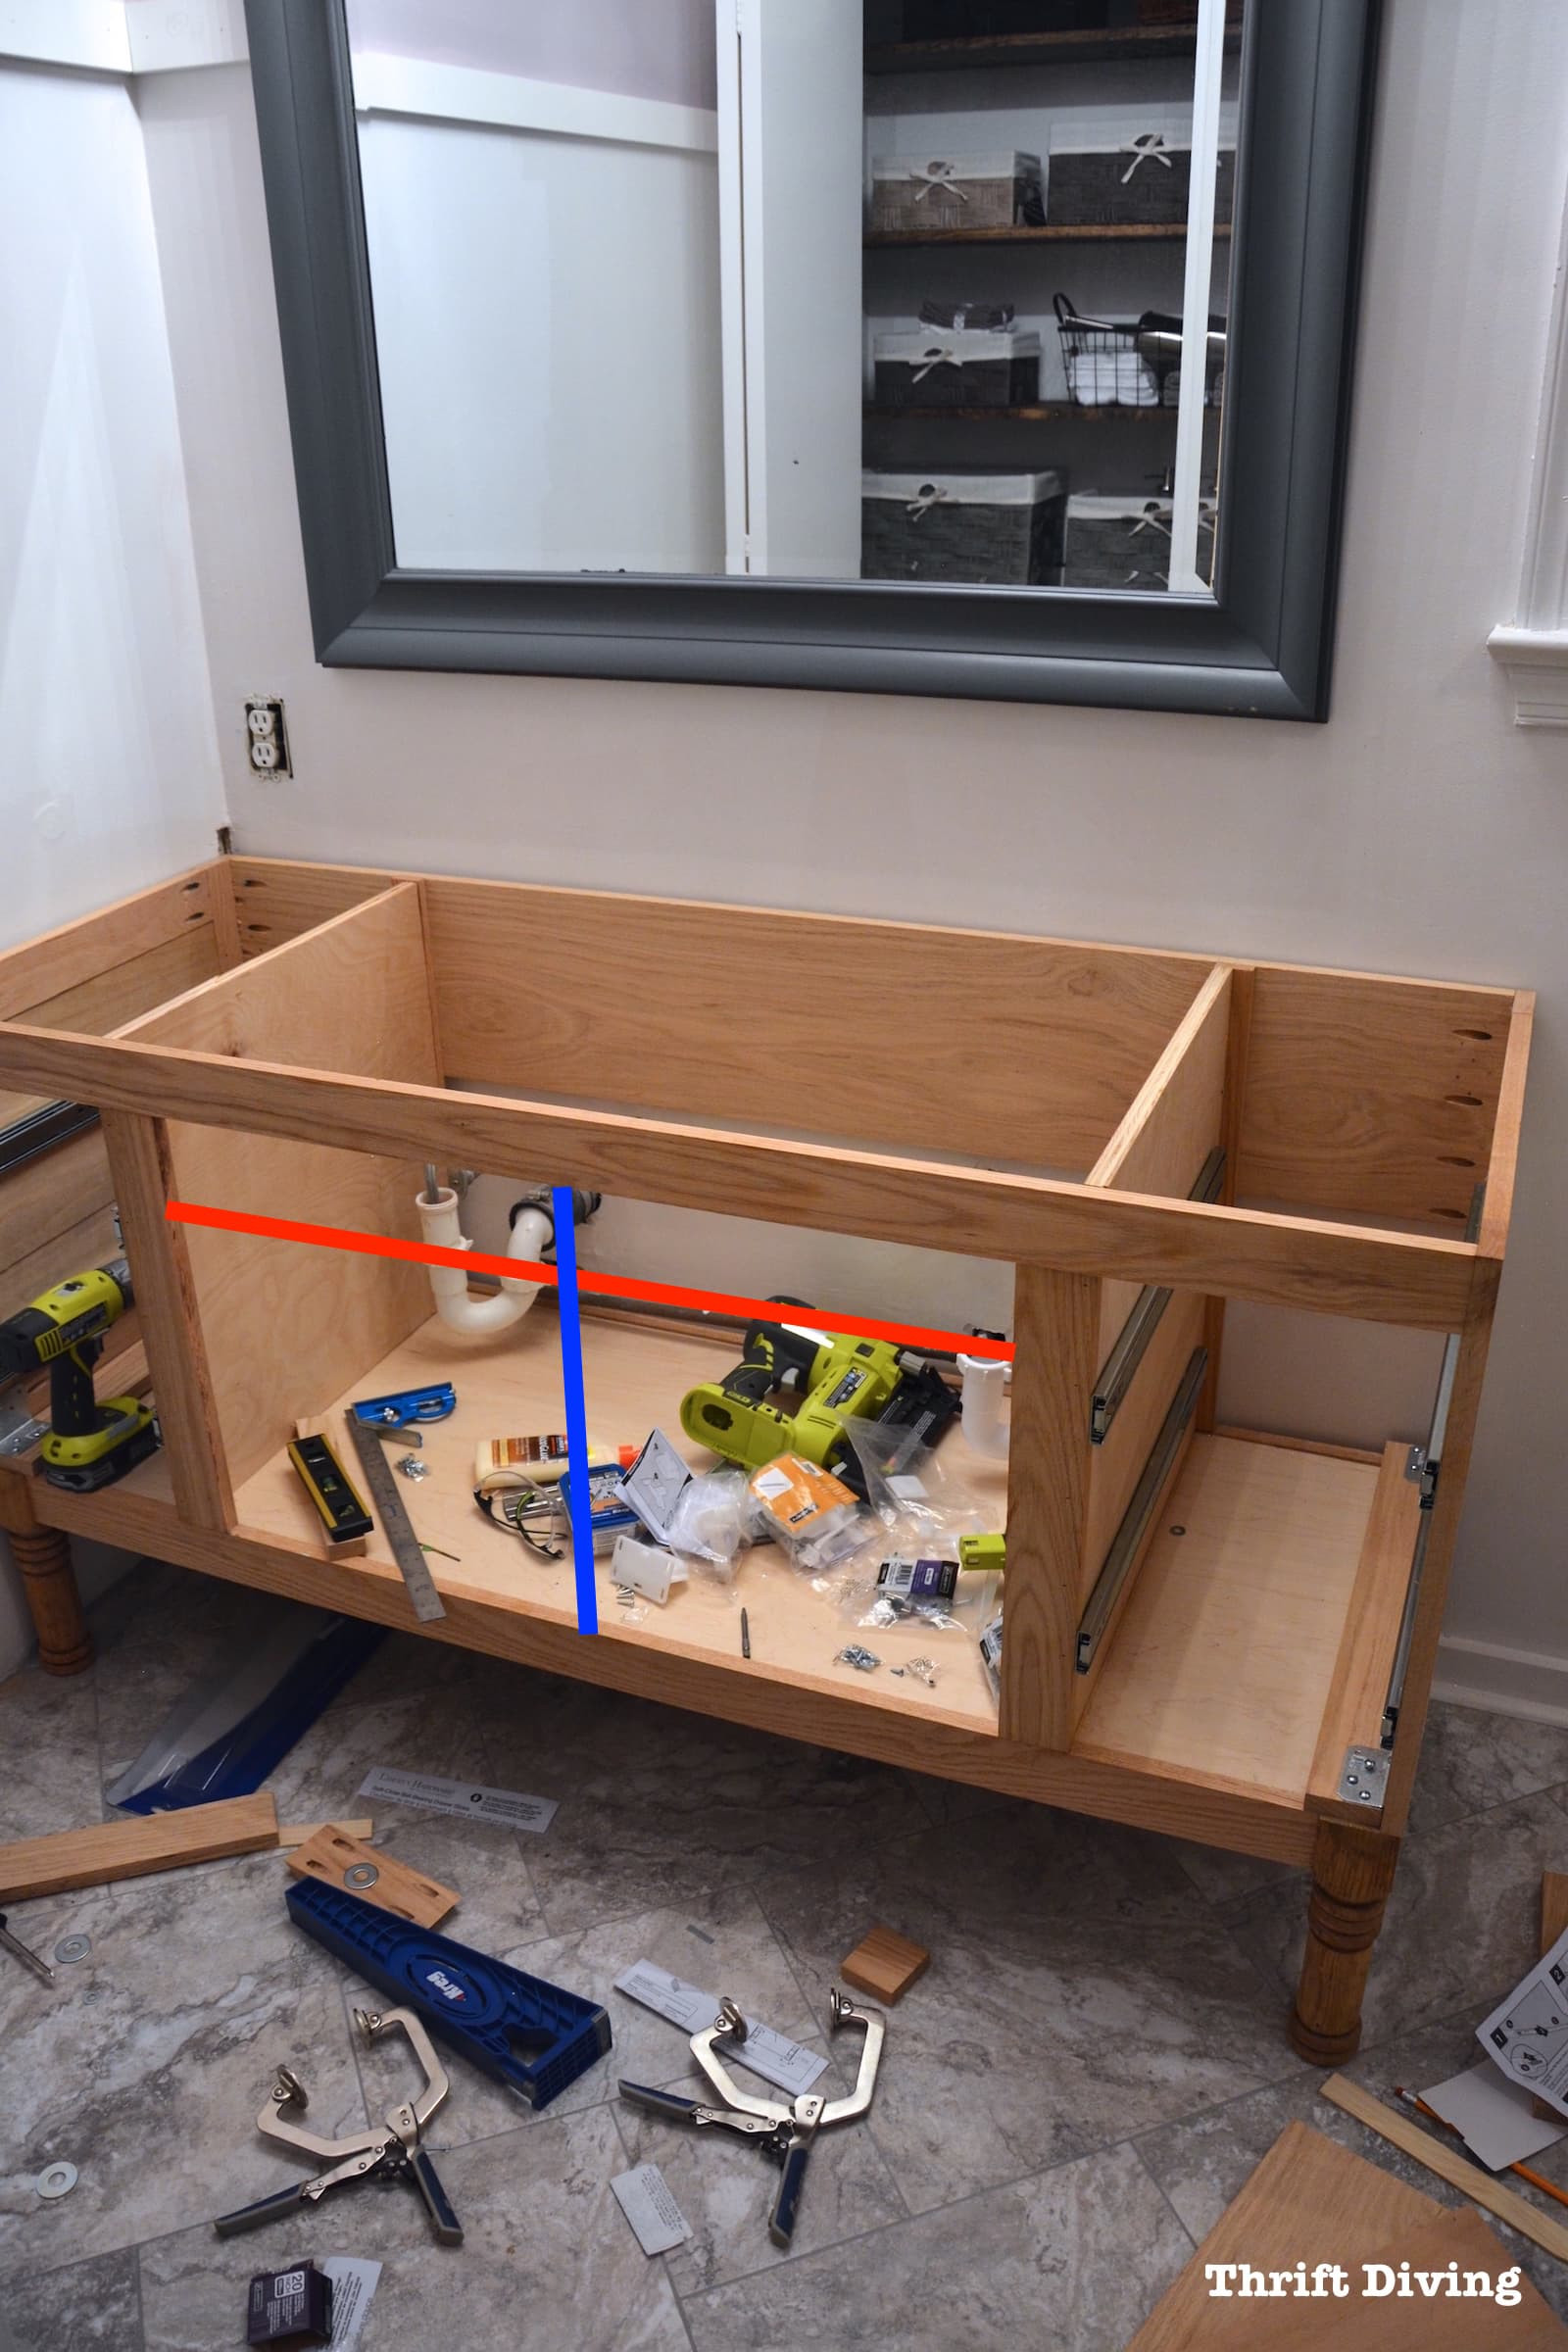 Best ideas about DIY Bathroom Cabinet
. Save or Pin Building a DIY Bathroom Vanity Part 5 Making Cabinet Doors Now.